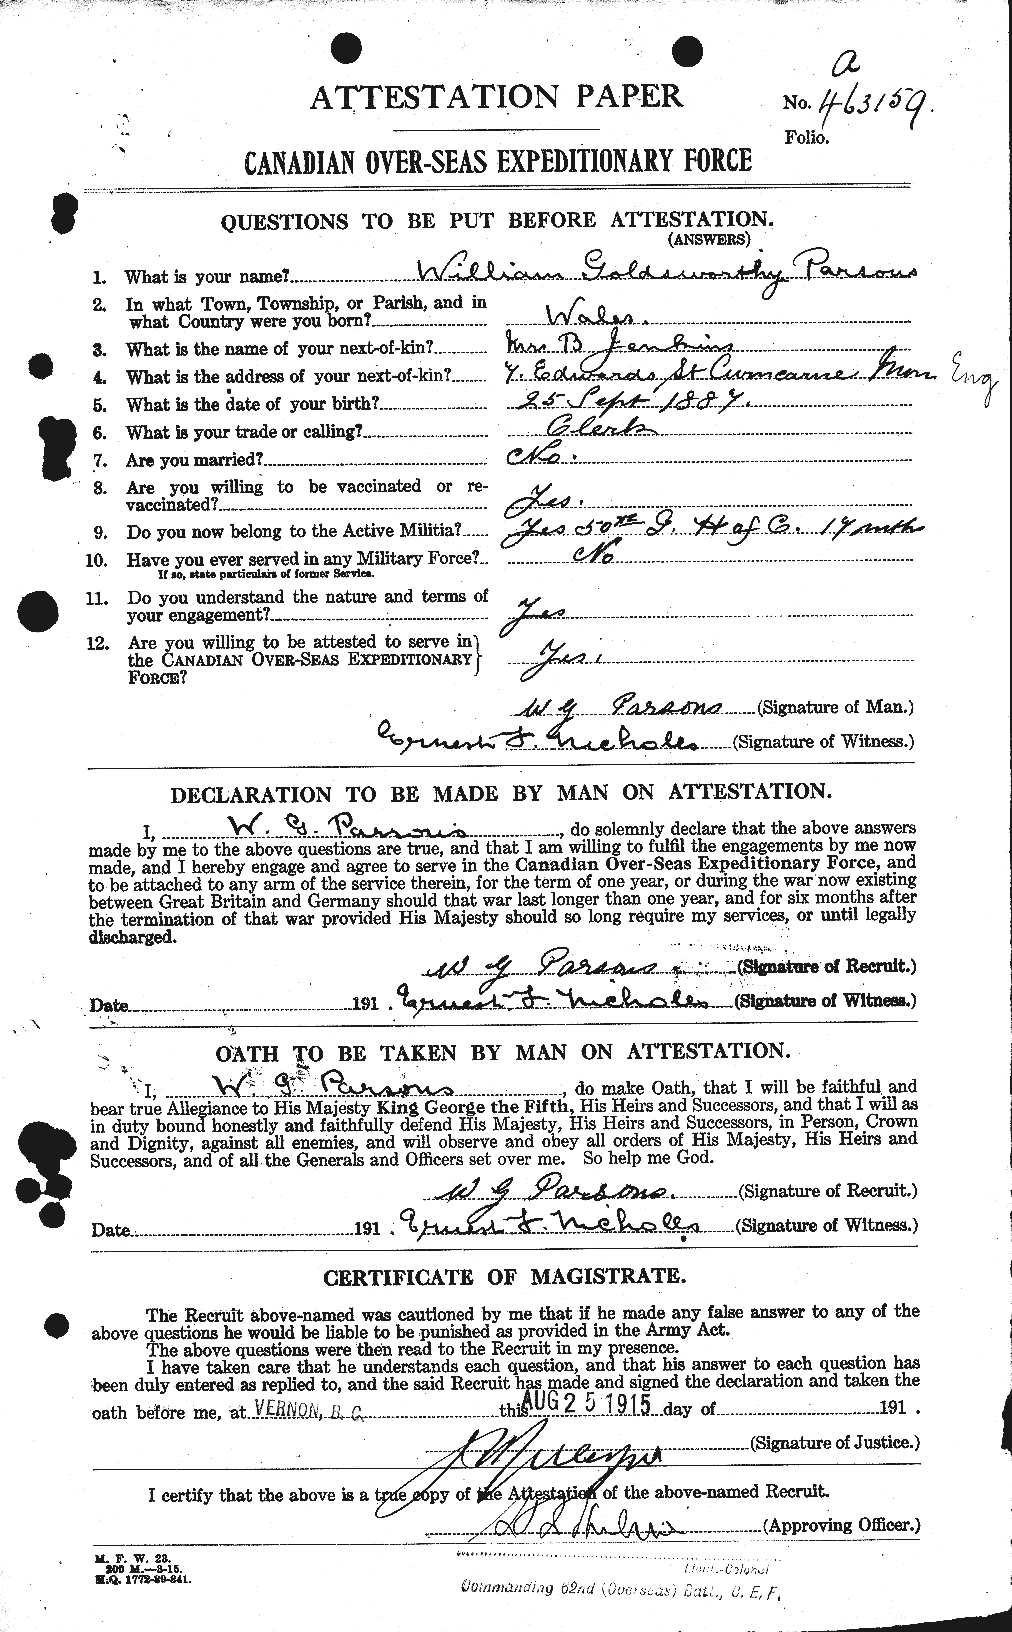 Personnel Records of the First World War - CEF 567041a